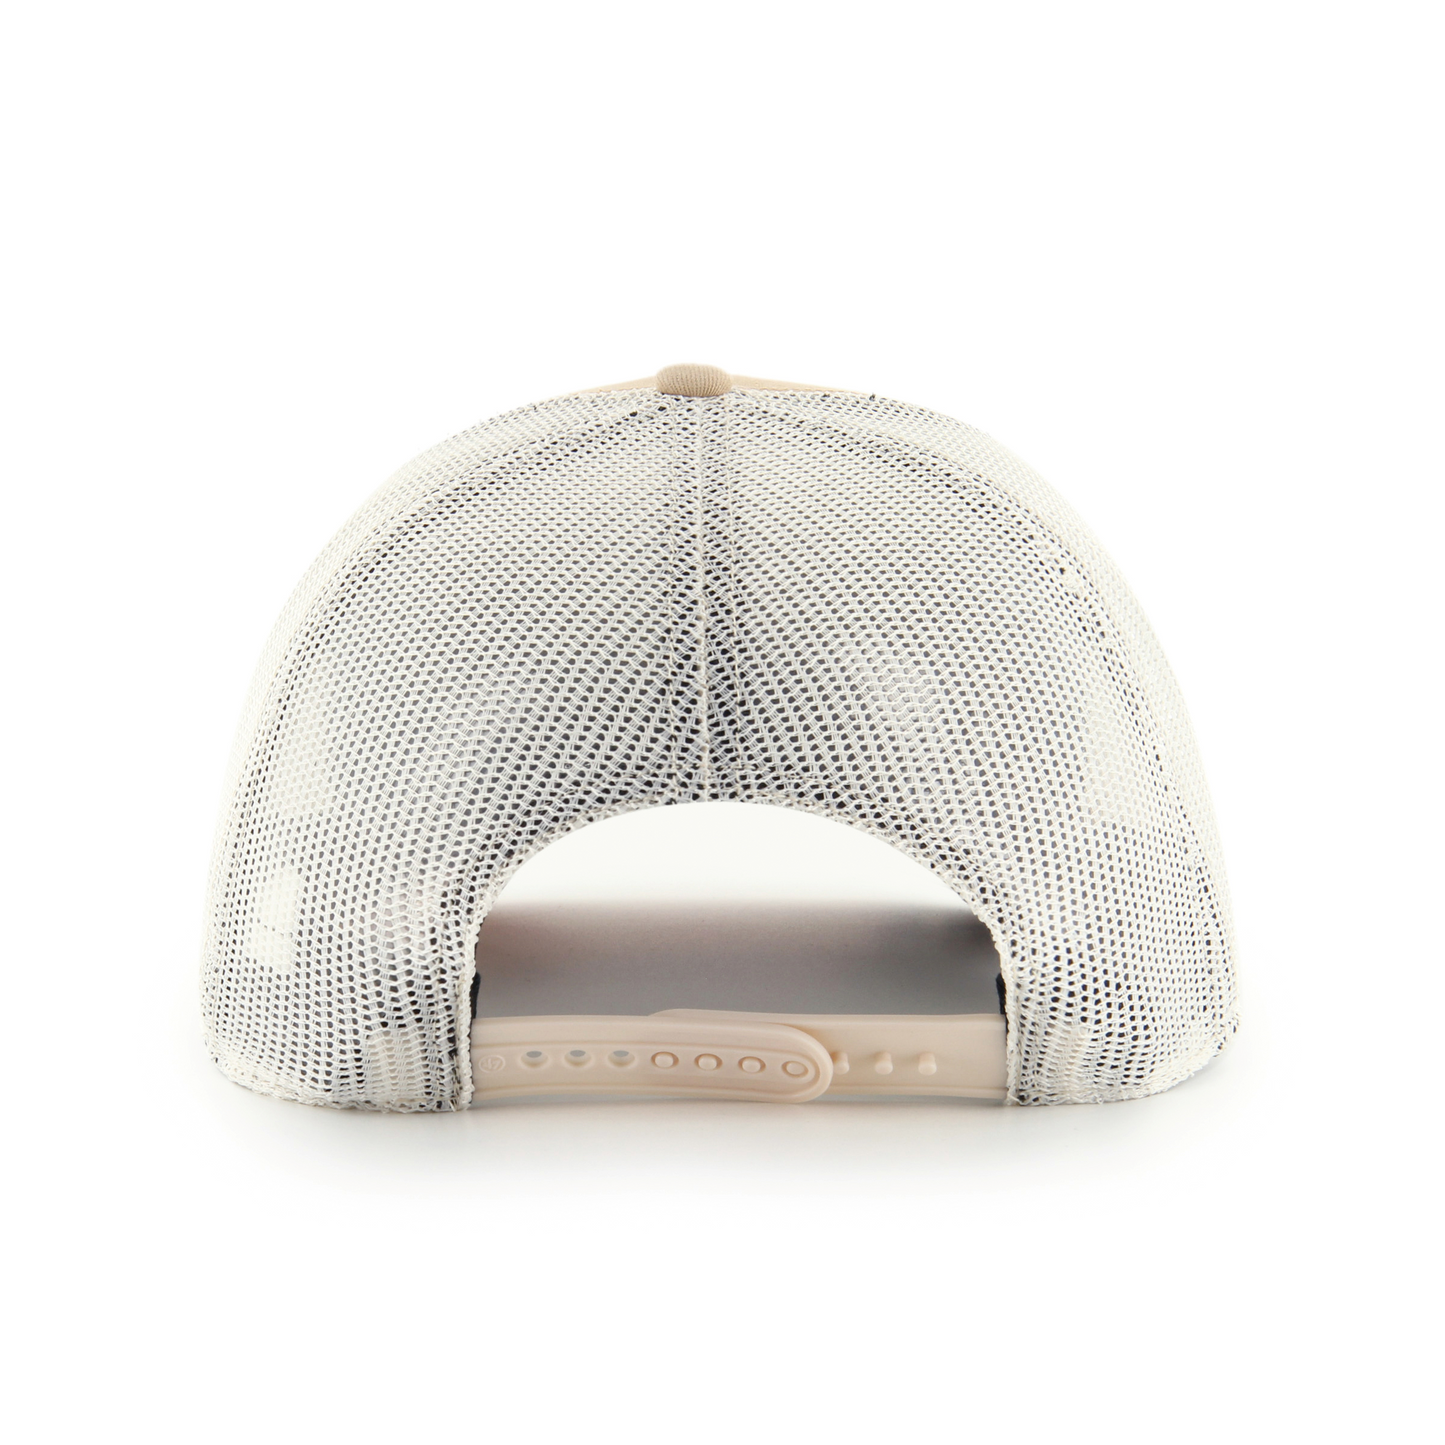 Back: Baseball cap trucker with white mesh and tan snaps